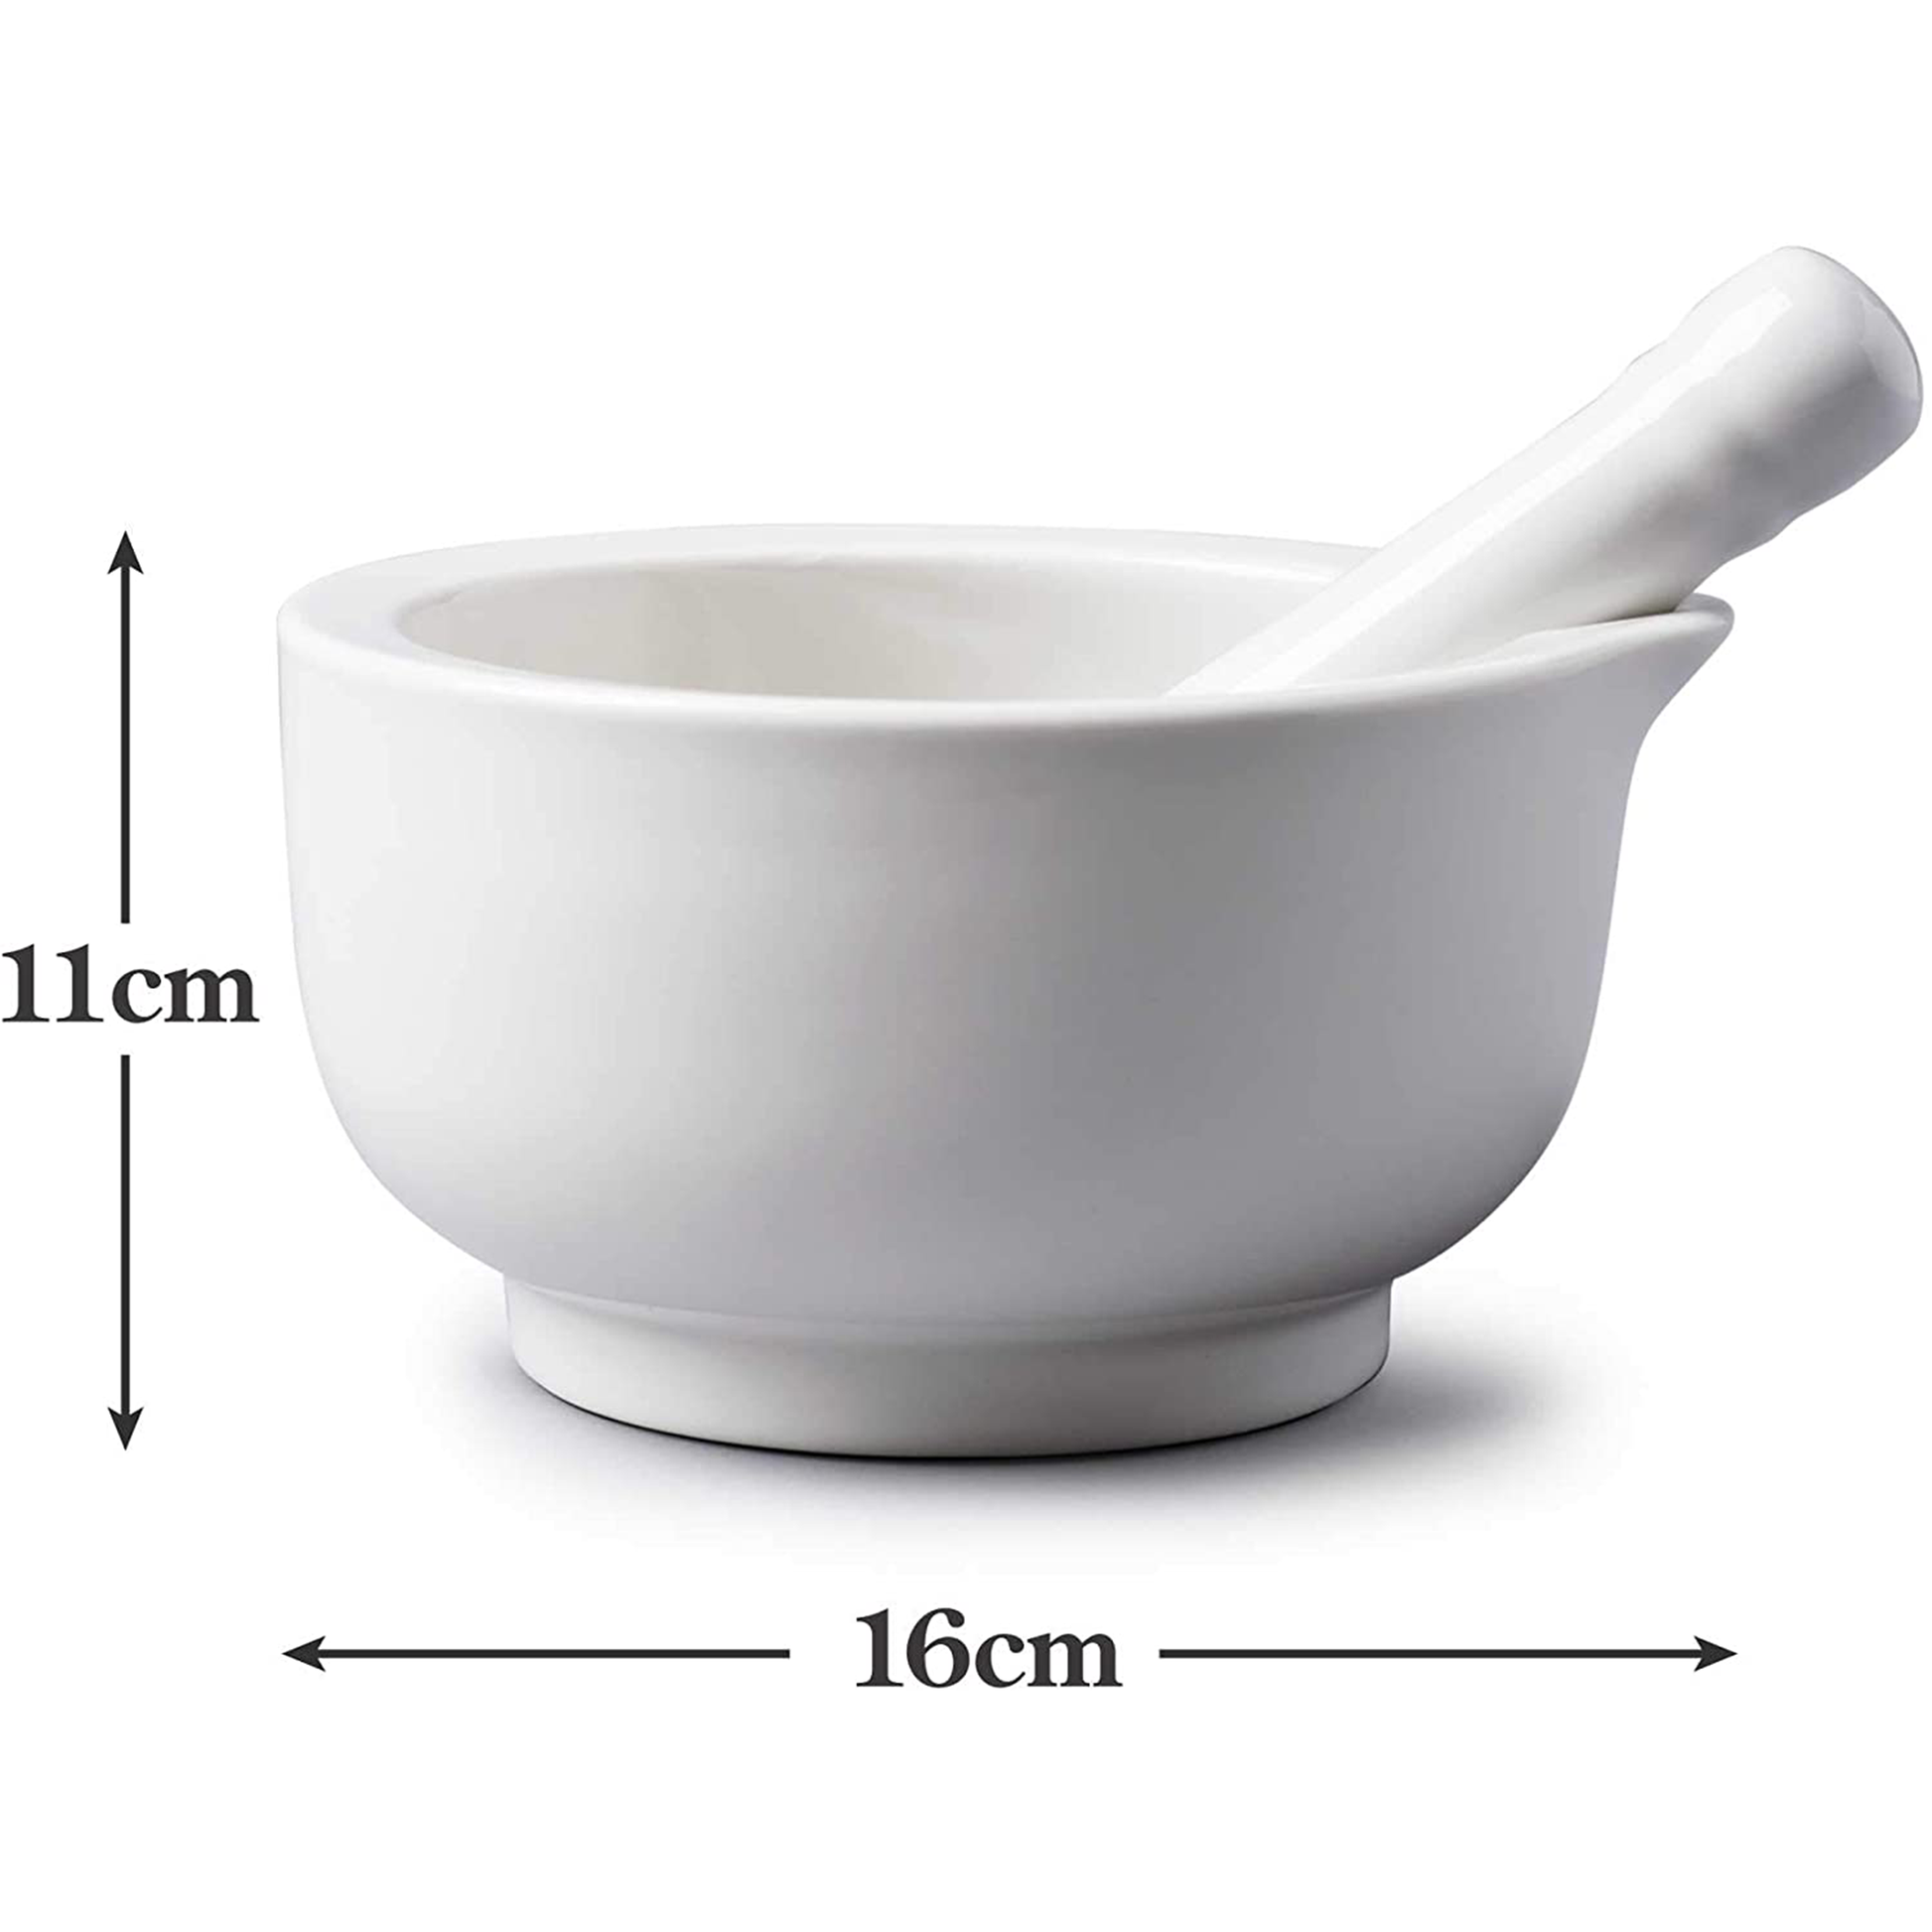 an image depicting the dimensions of the mortar and pestle